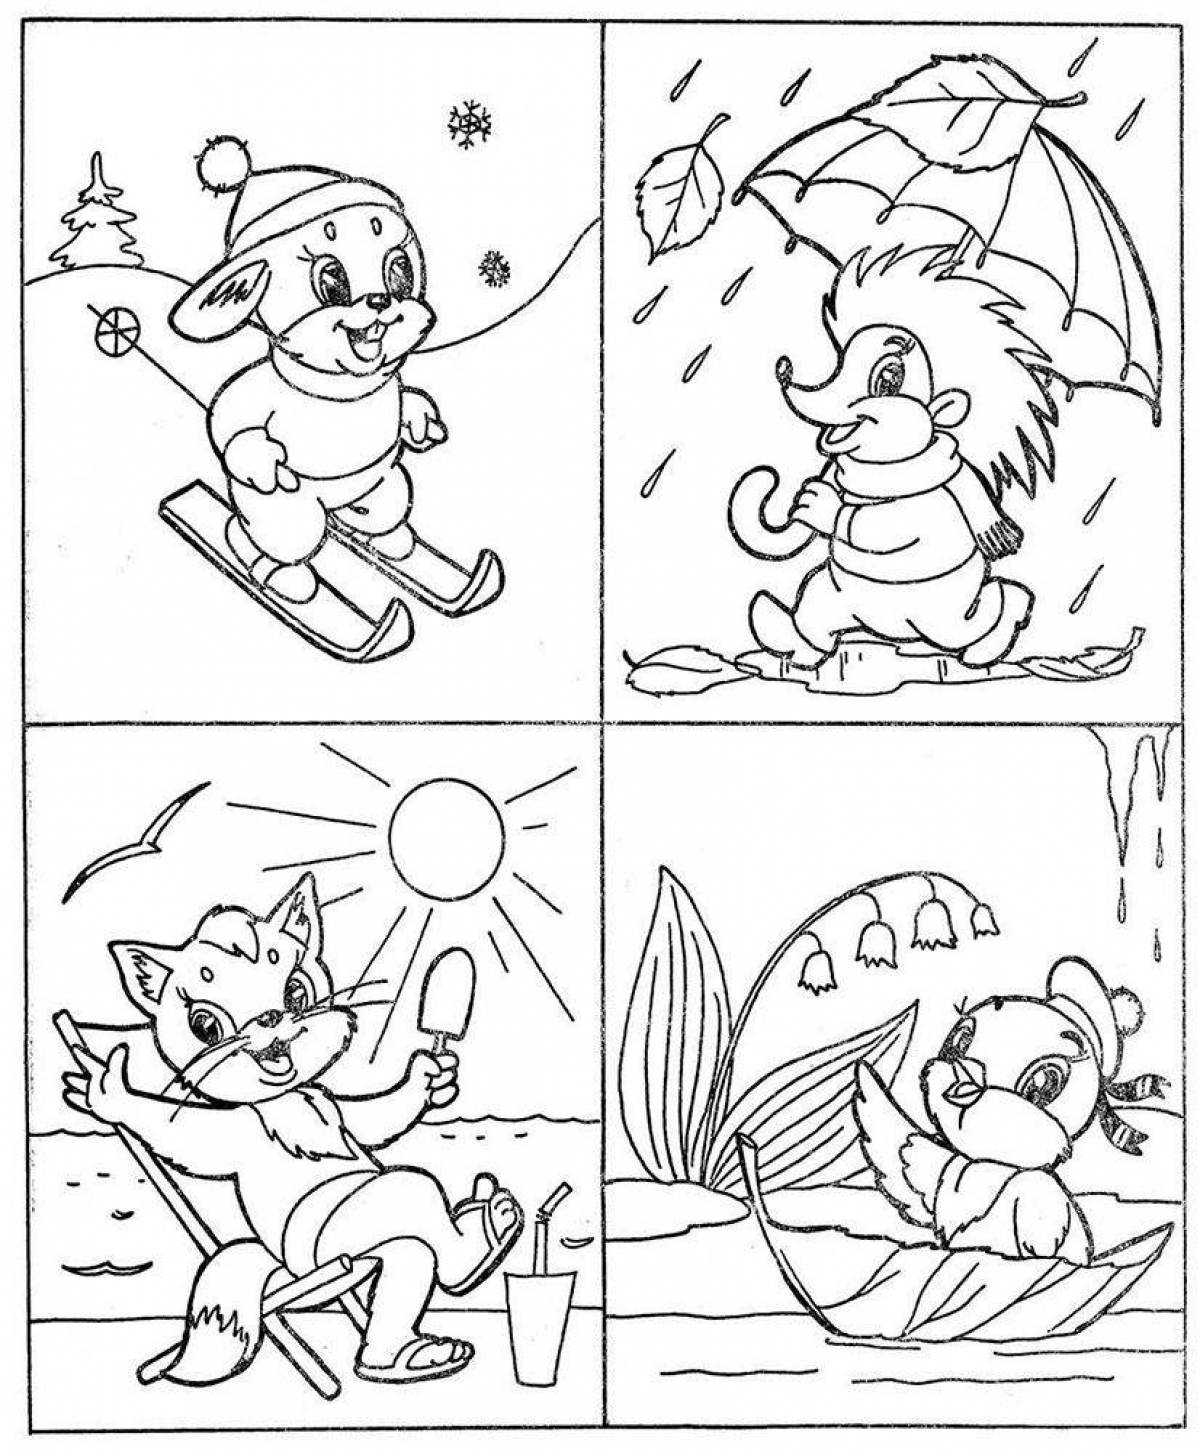 Coloring book snowy winter for children